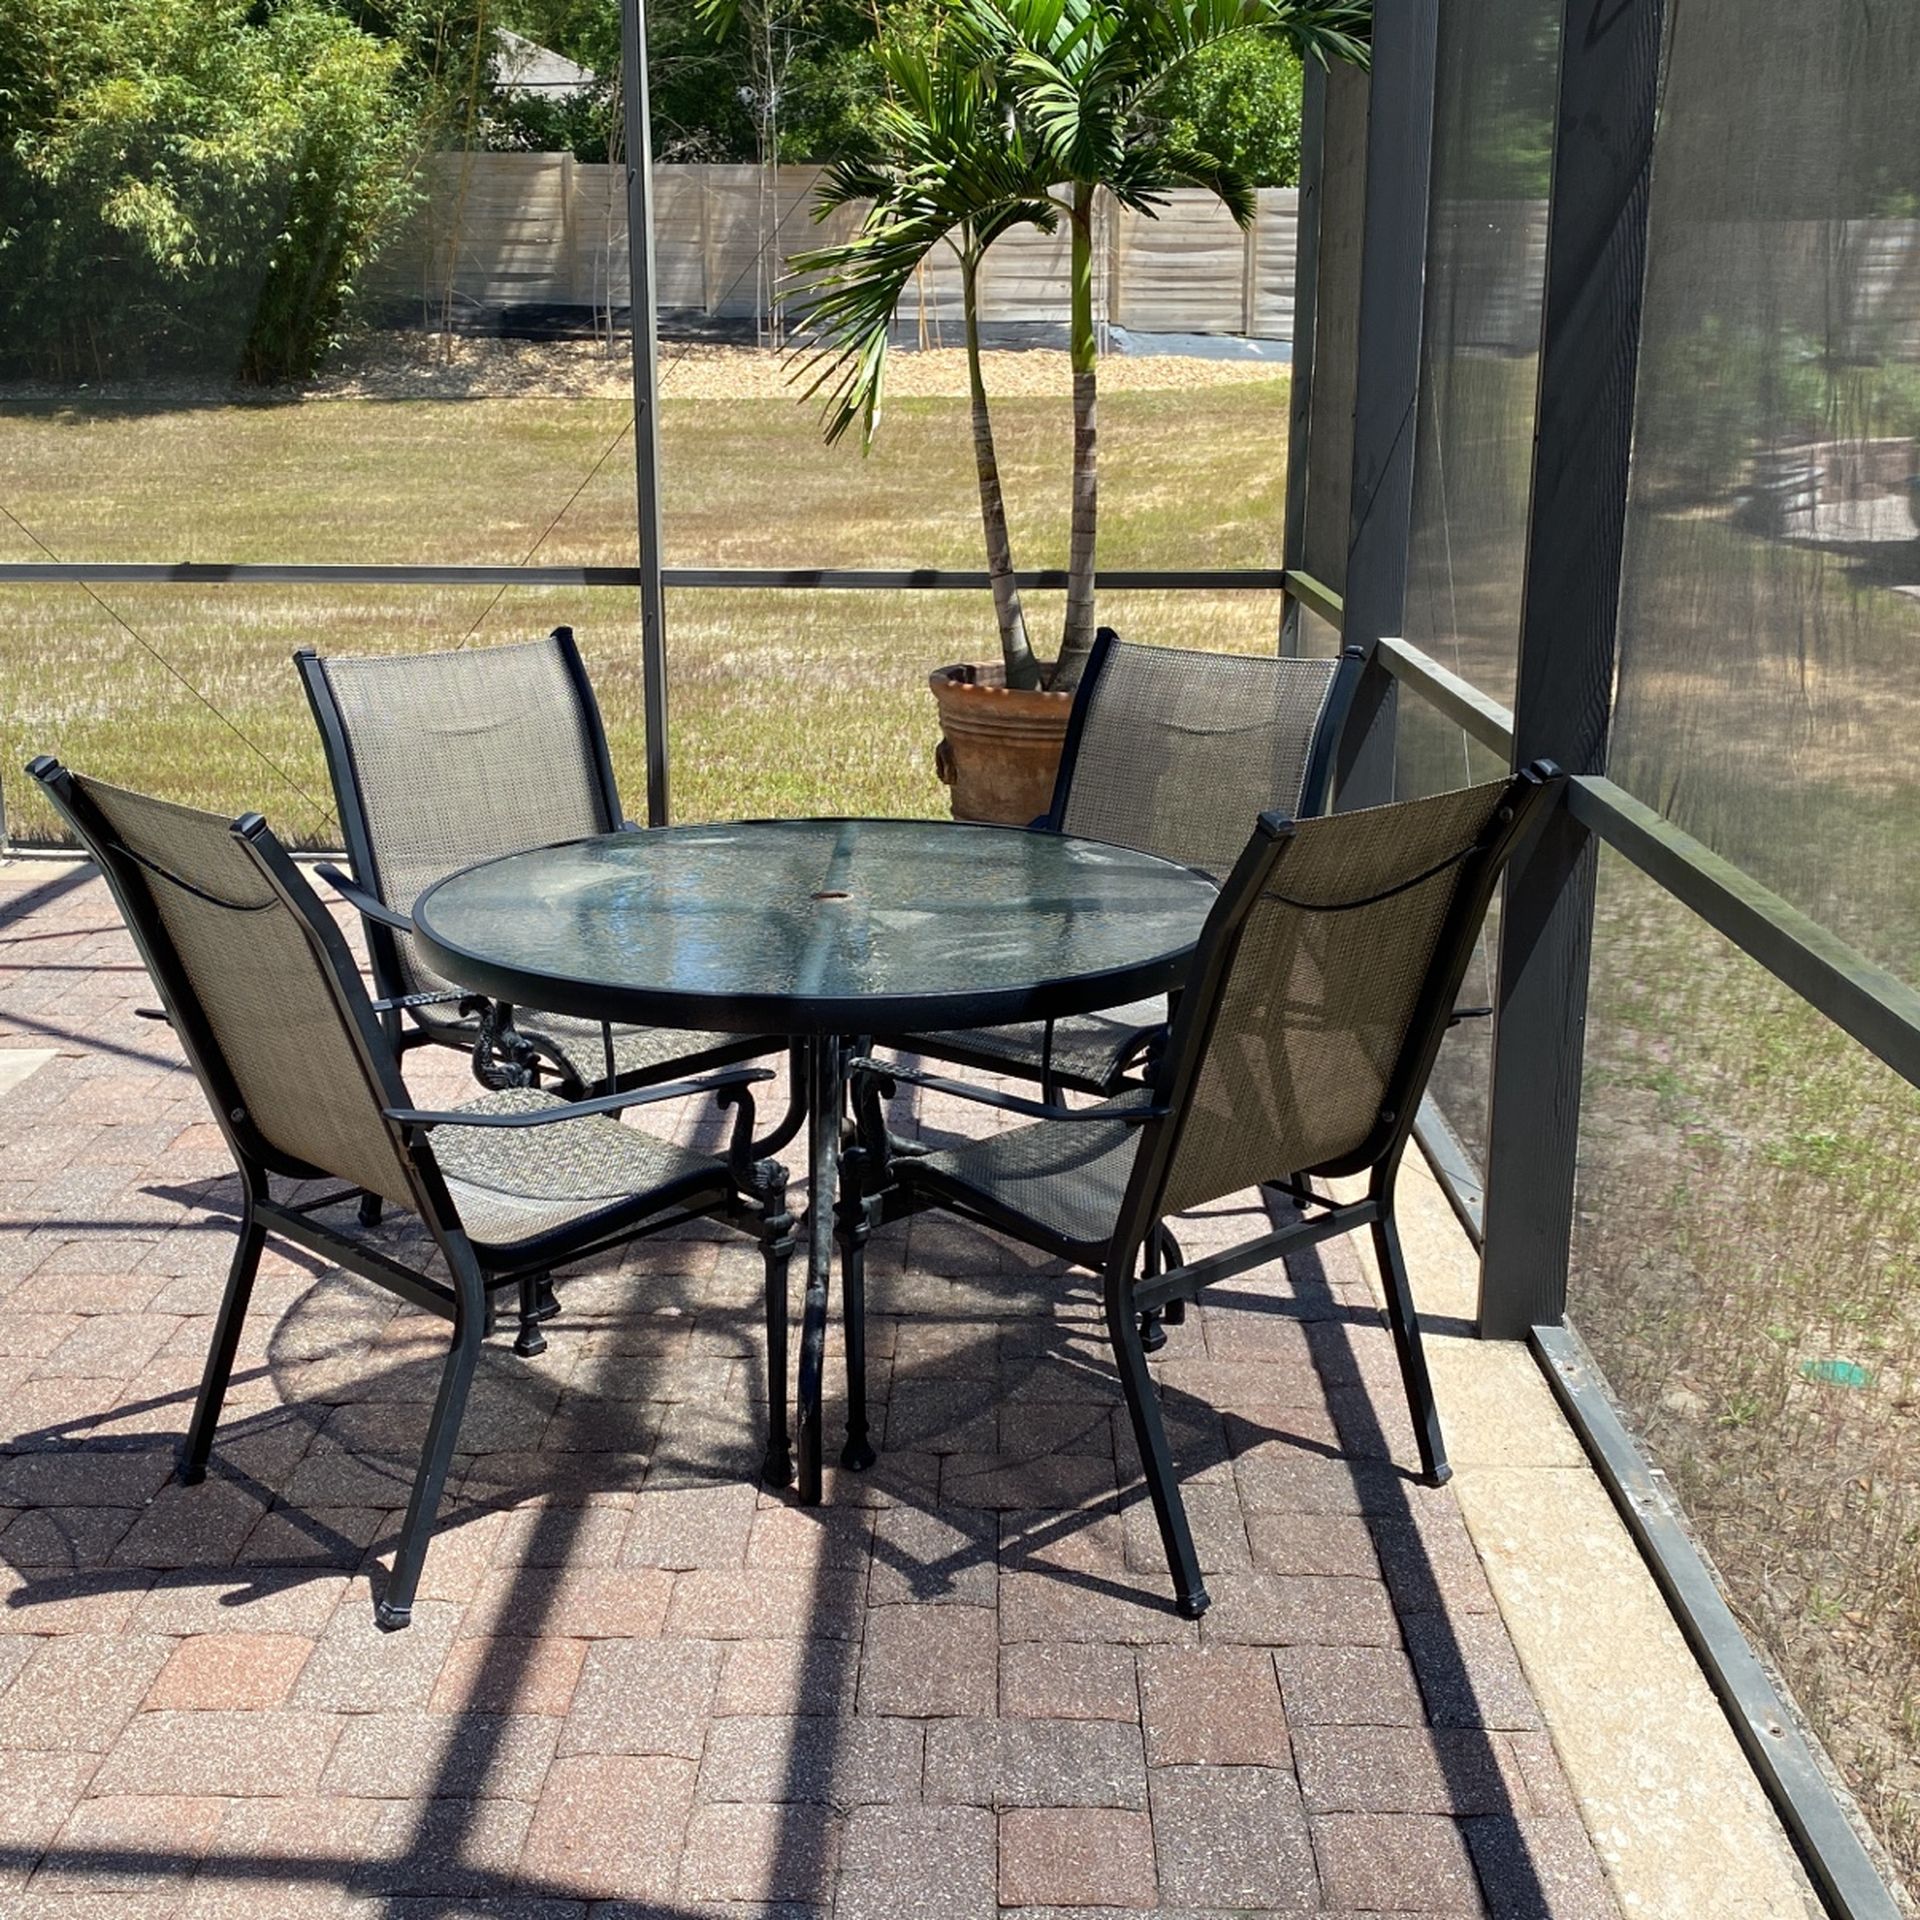 PATIO OUTDOOR TABLE & 4 CHAIRS